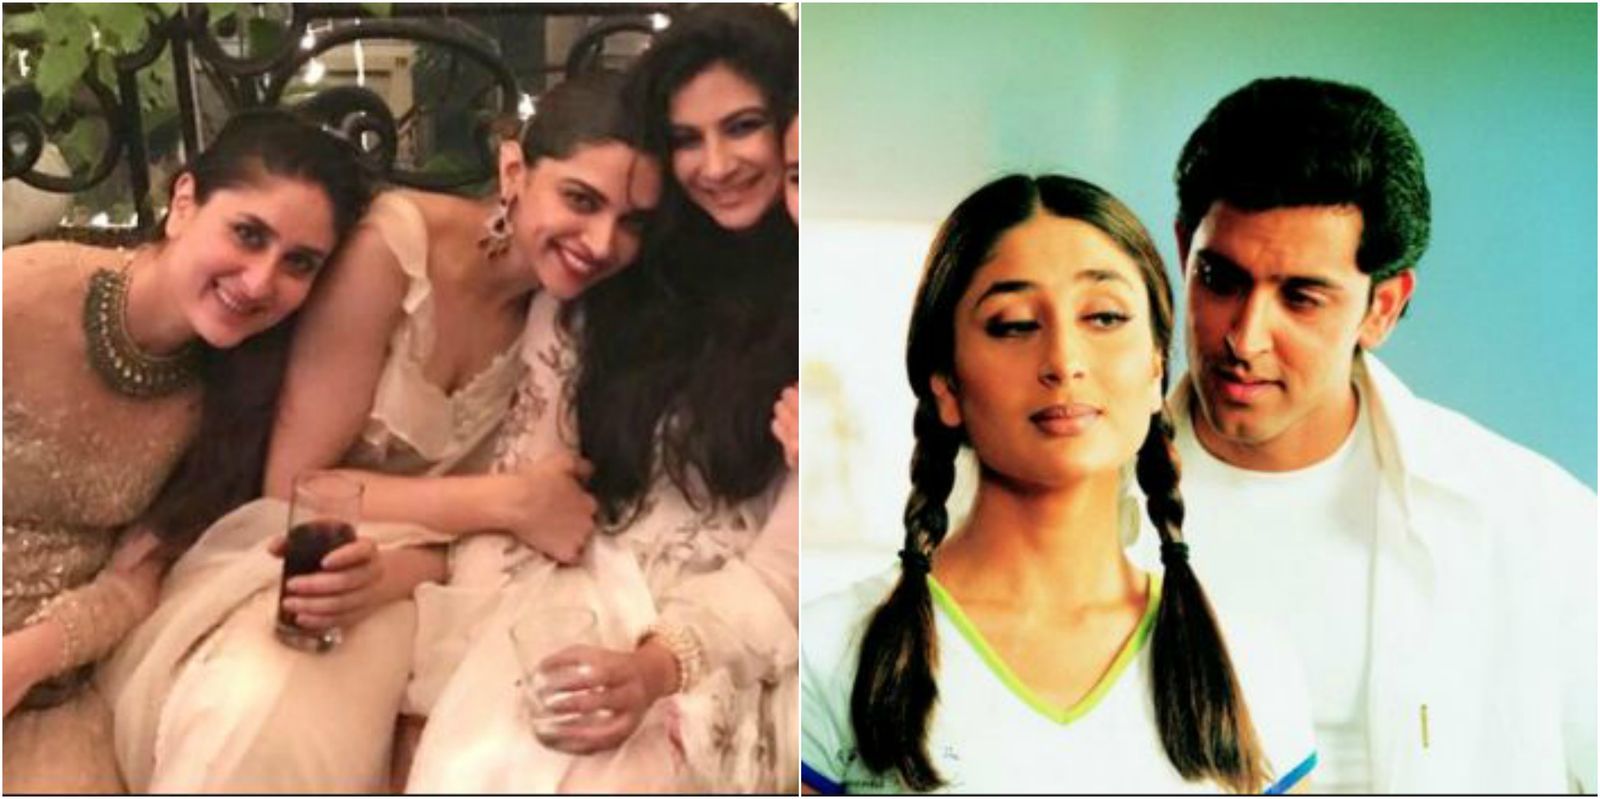 After Priyanka Chopra, Maybe Its Time For Kareena Kapoor To Make Amends With These Celebs As Well